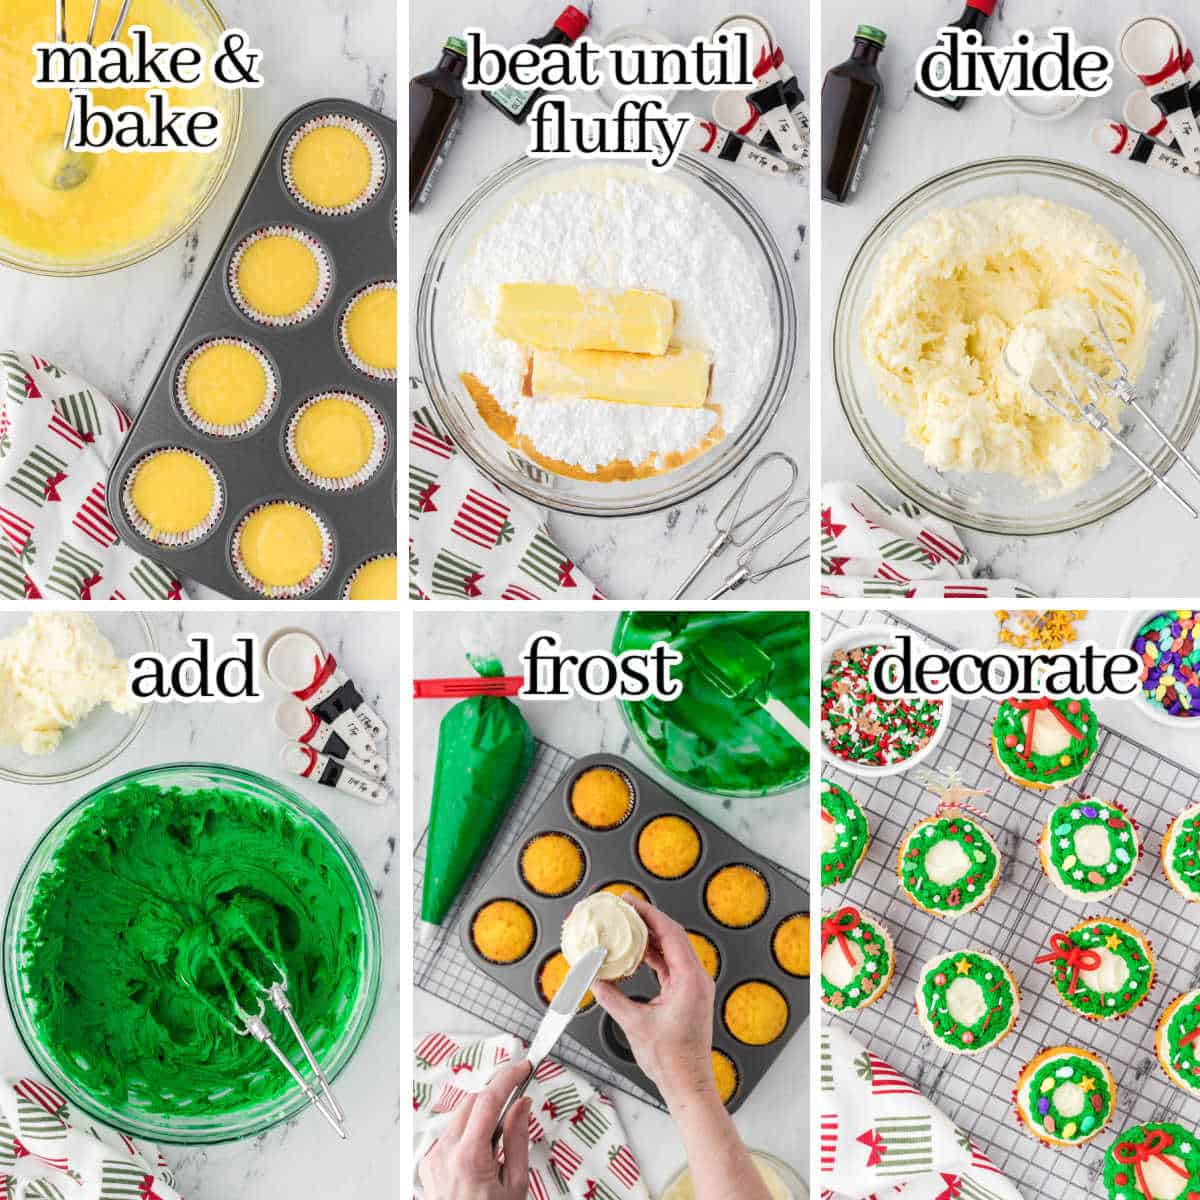 Step-by-step instructions to make the cupcake recipe. With print overlay.